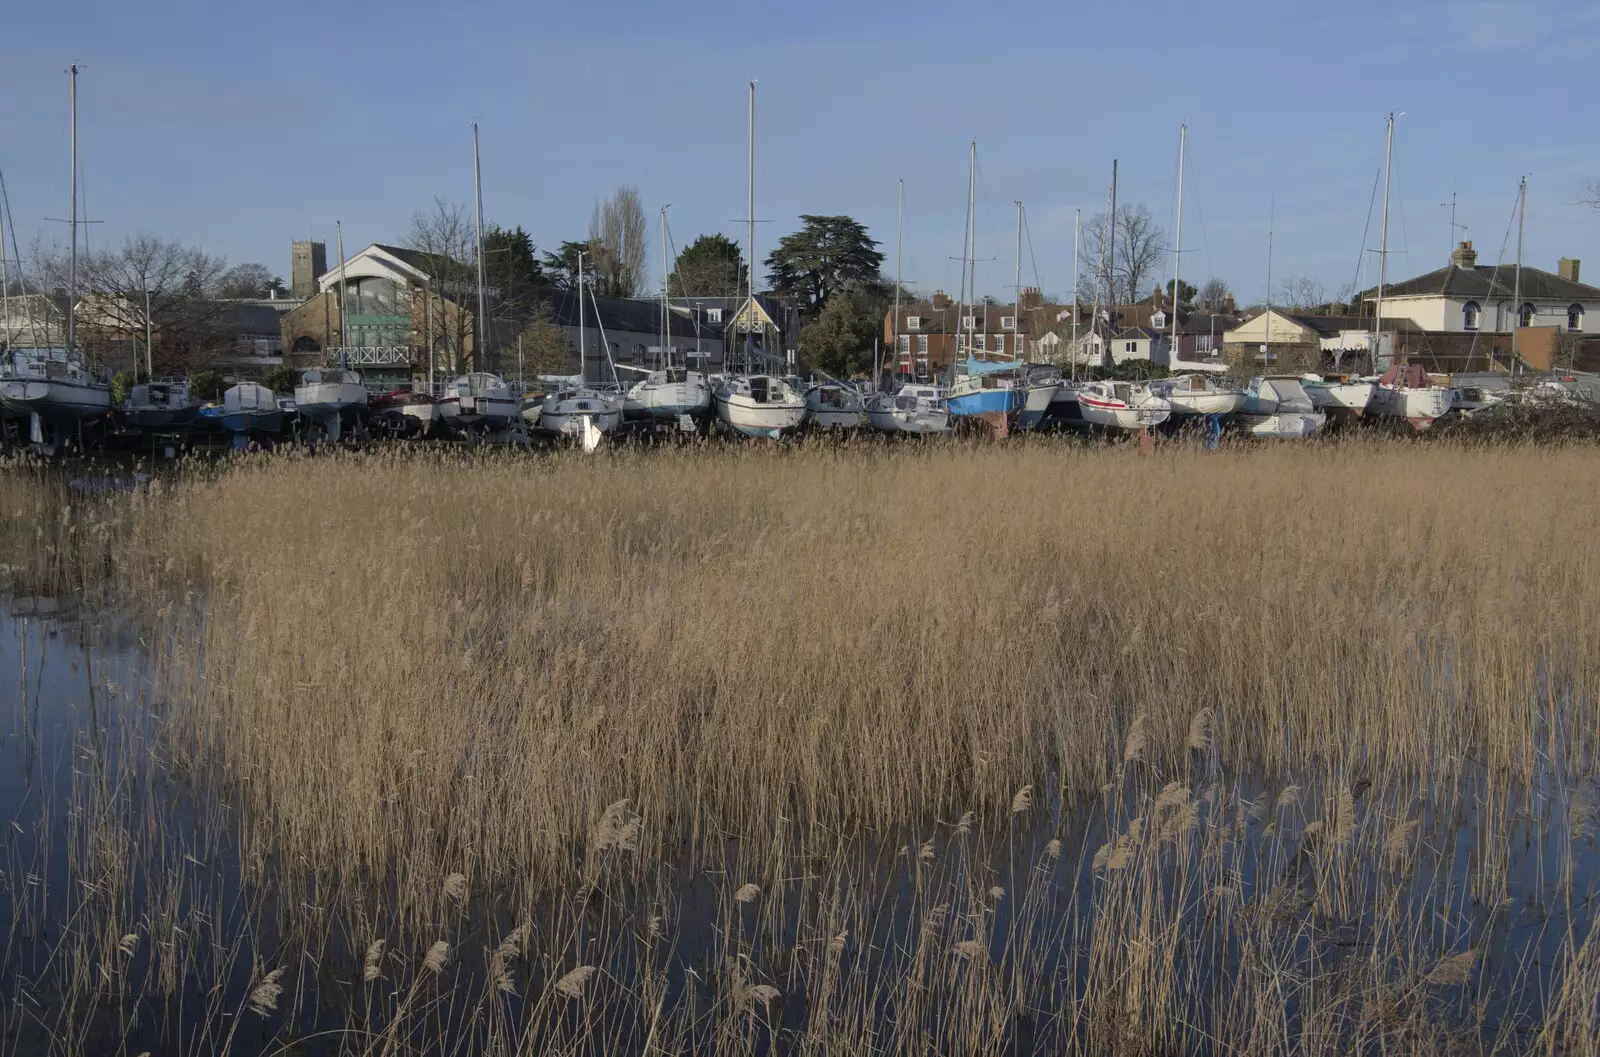 More reeds and boats, from A February Miscellany, Diss and Woodbridge, Suffolk - 3rd February 2024